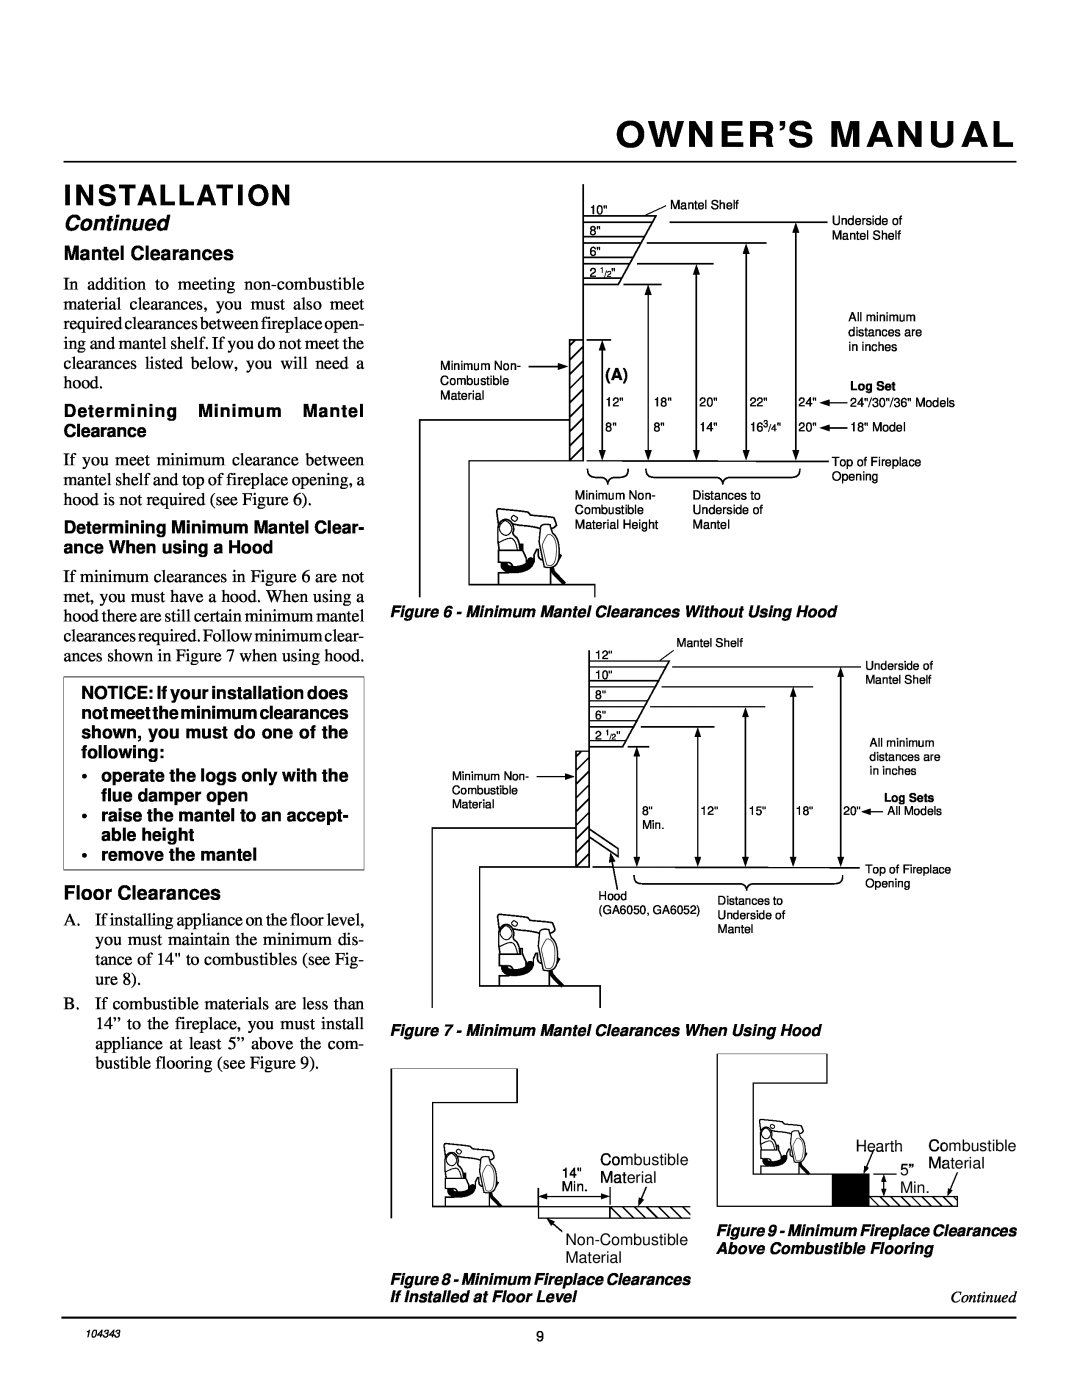 Vanguard Managed Solutions PRVYS18PWA installation manual Mantel Clearances, Floor Clearances, Installation, Continued 